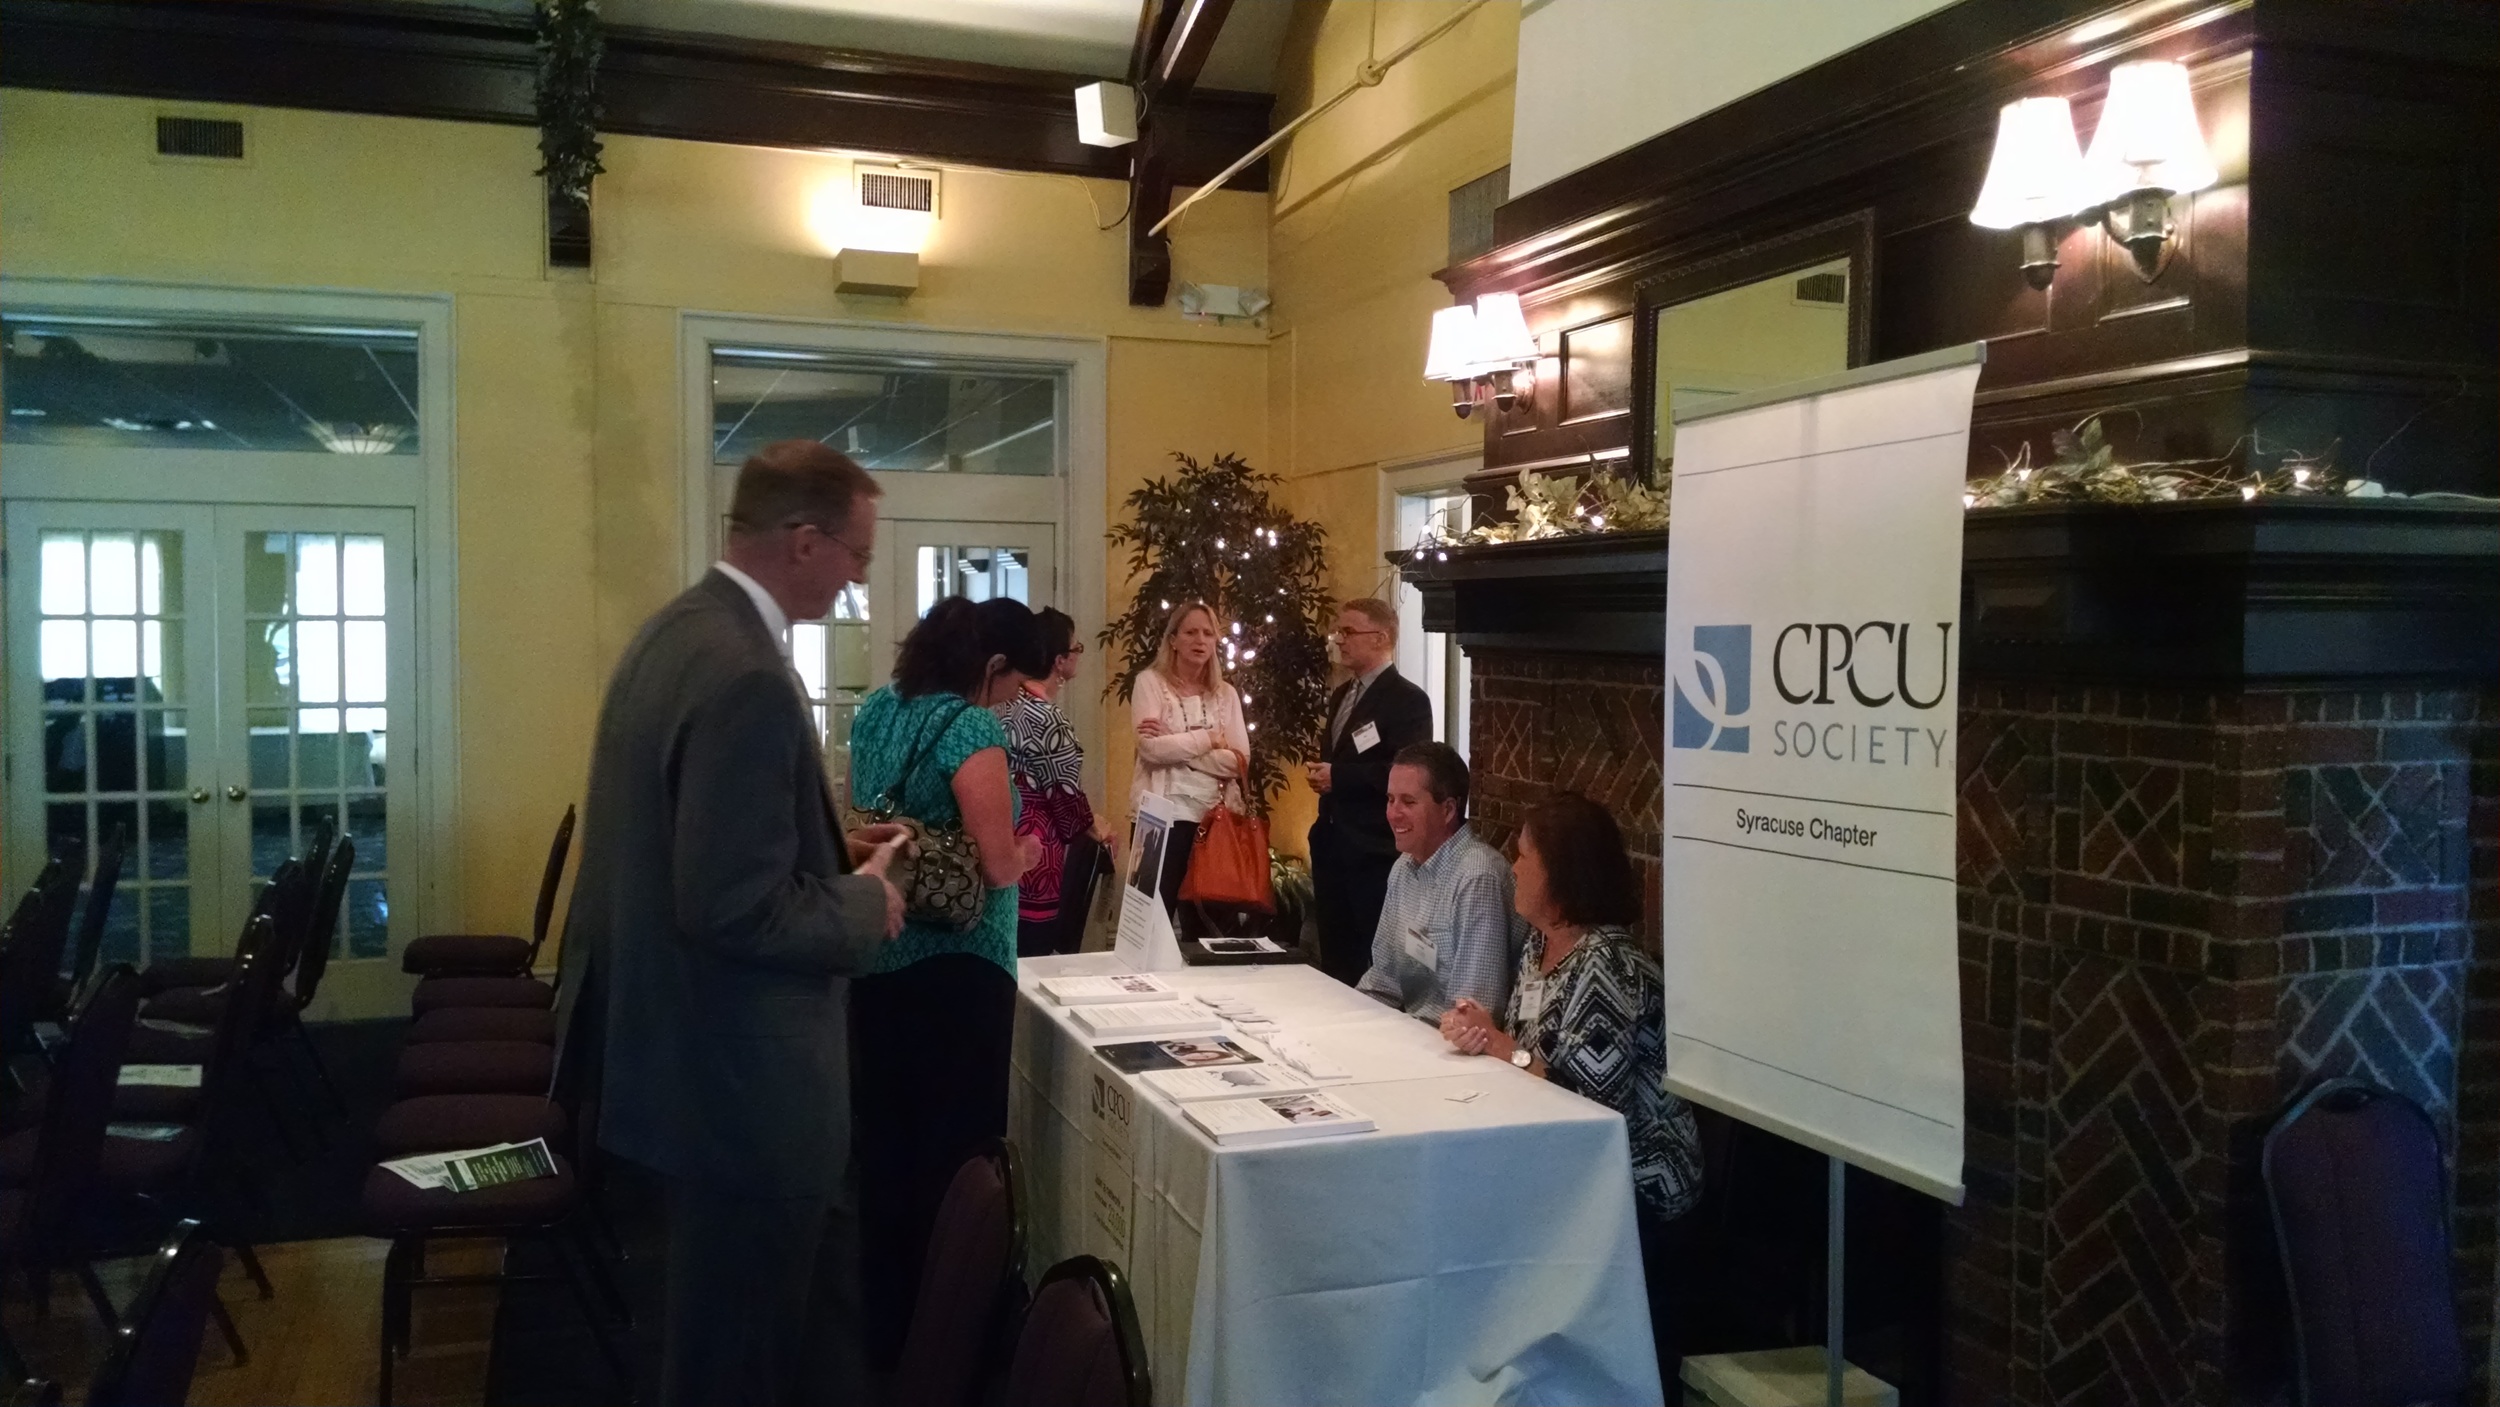 Syracuse Society of CPCU co-sponsored the event